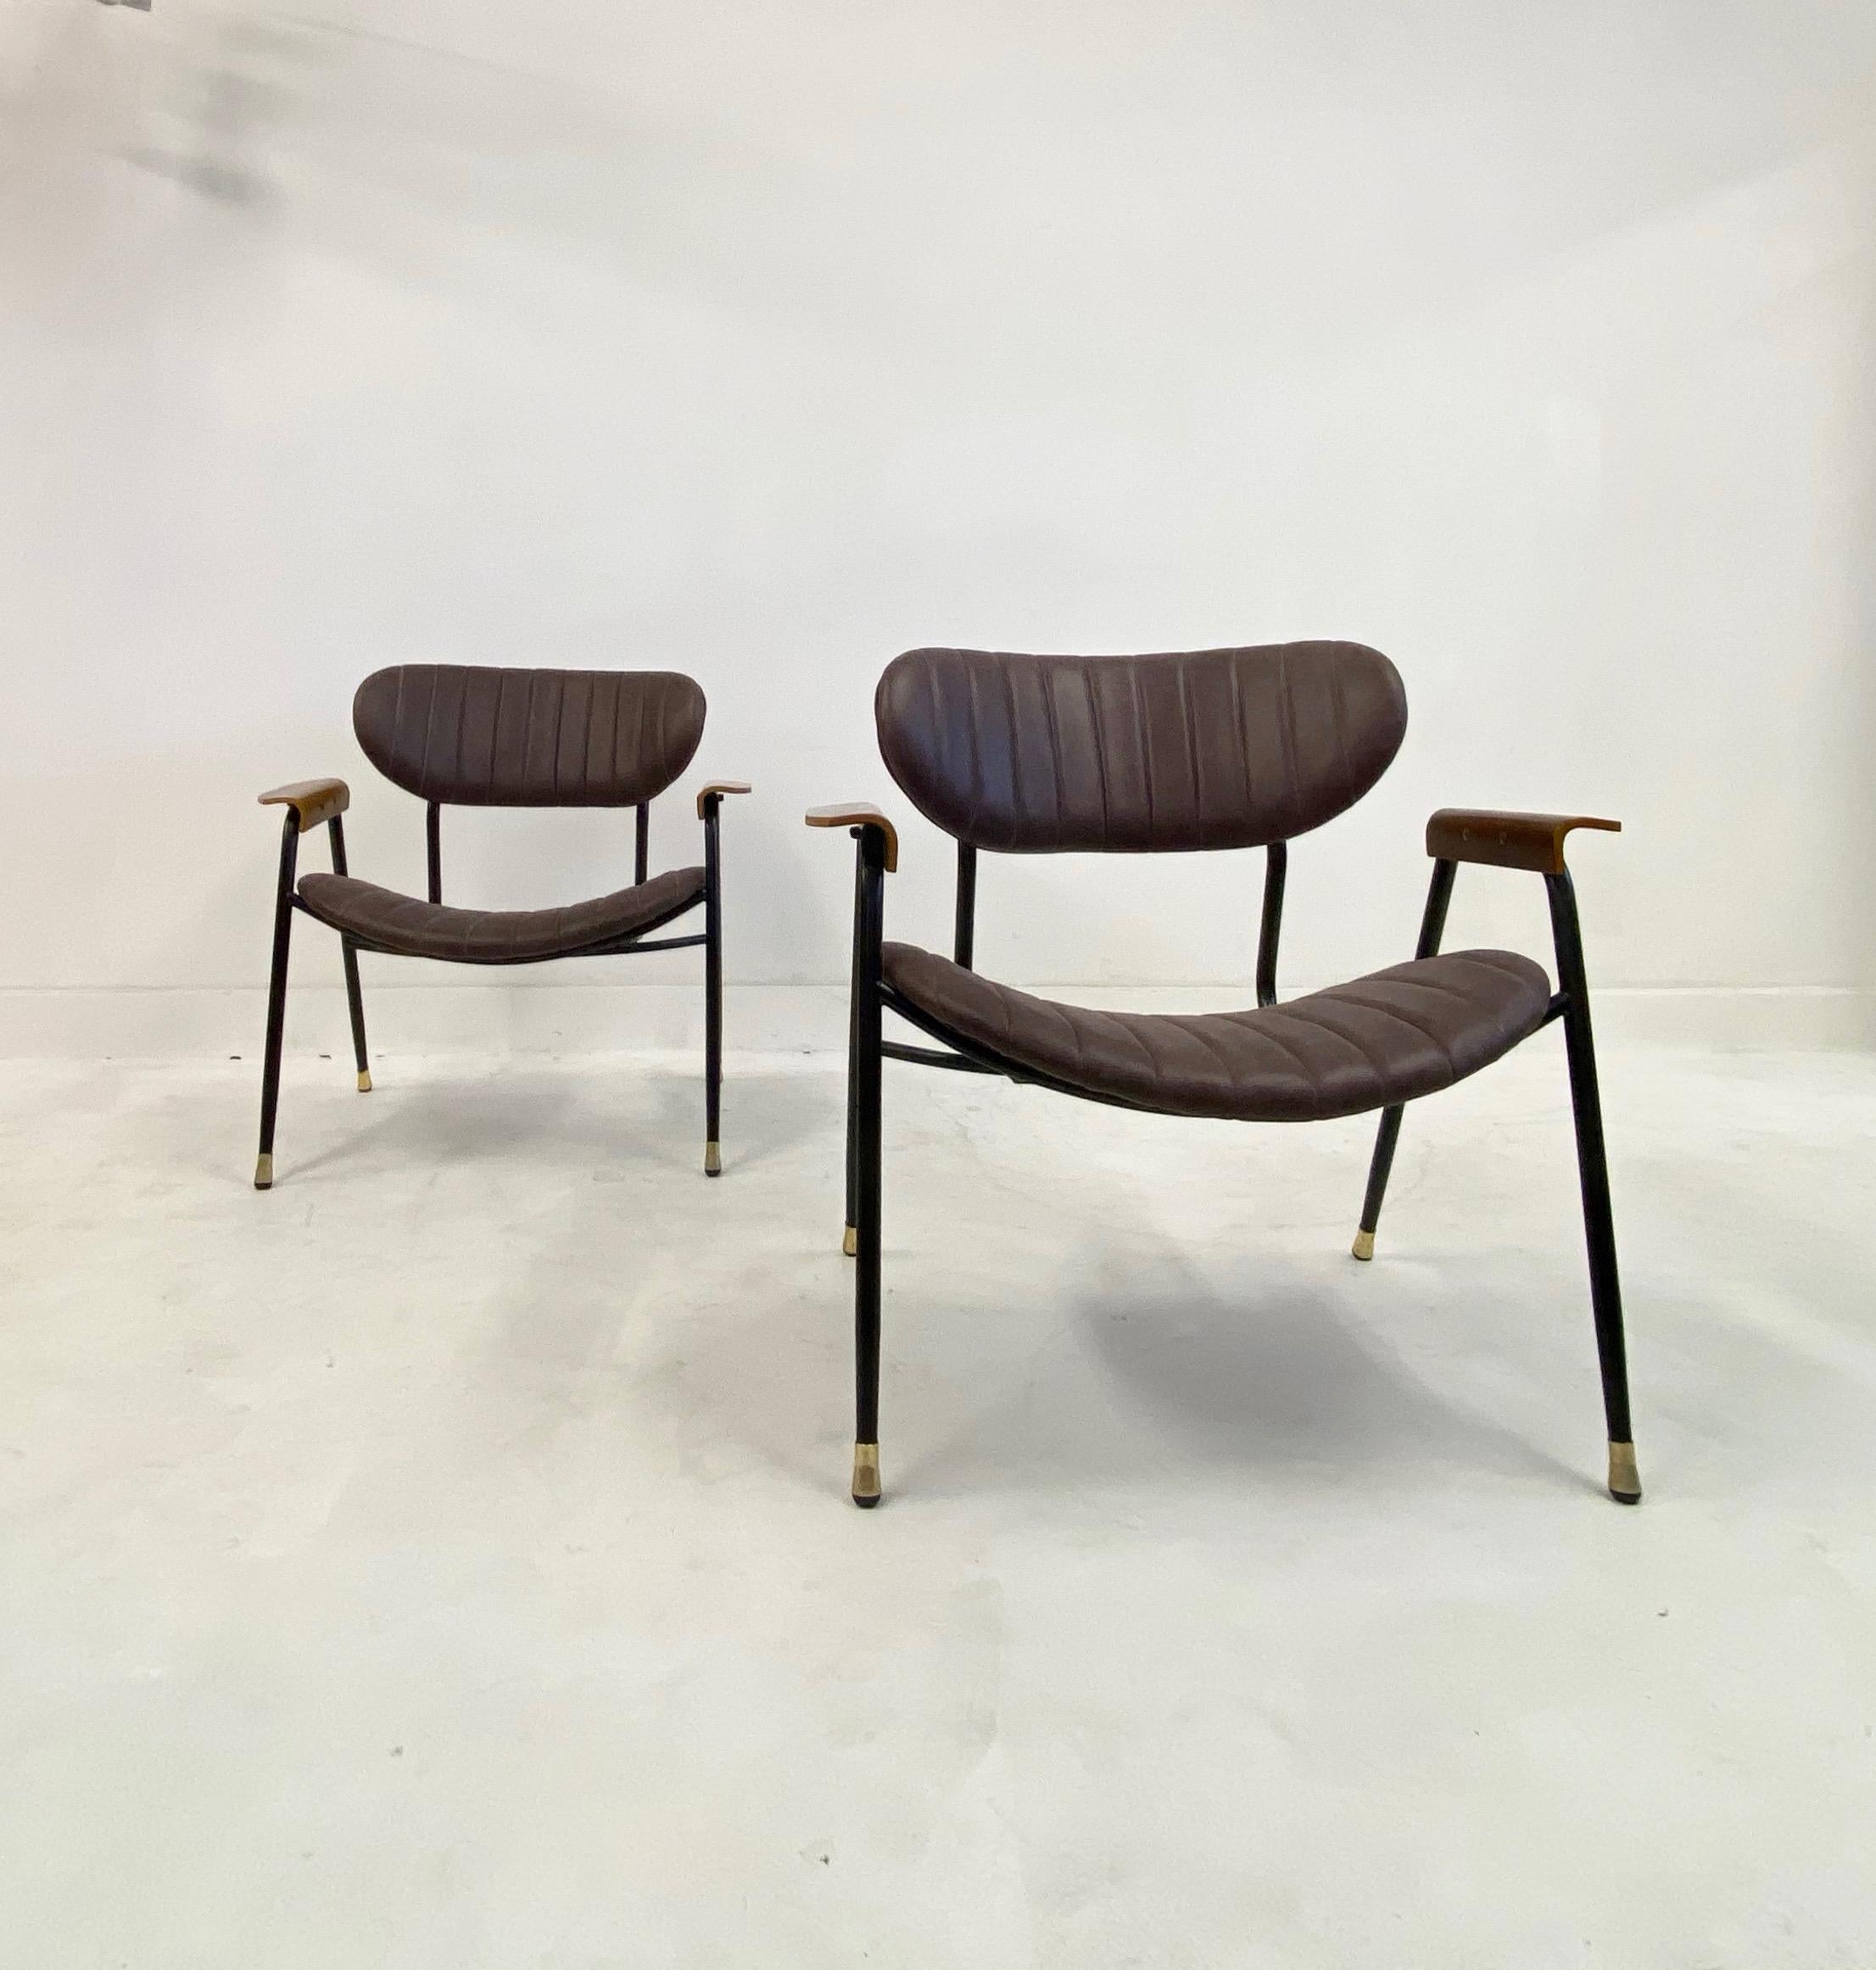 Steel Pair of Midcentury Italian Leather Armchairs by Gastone Rinaldi for RIMA